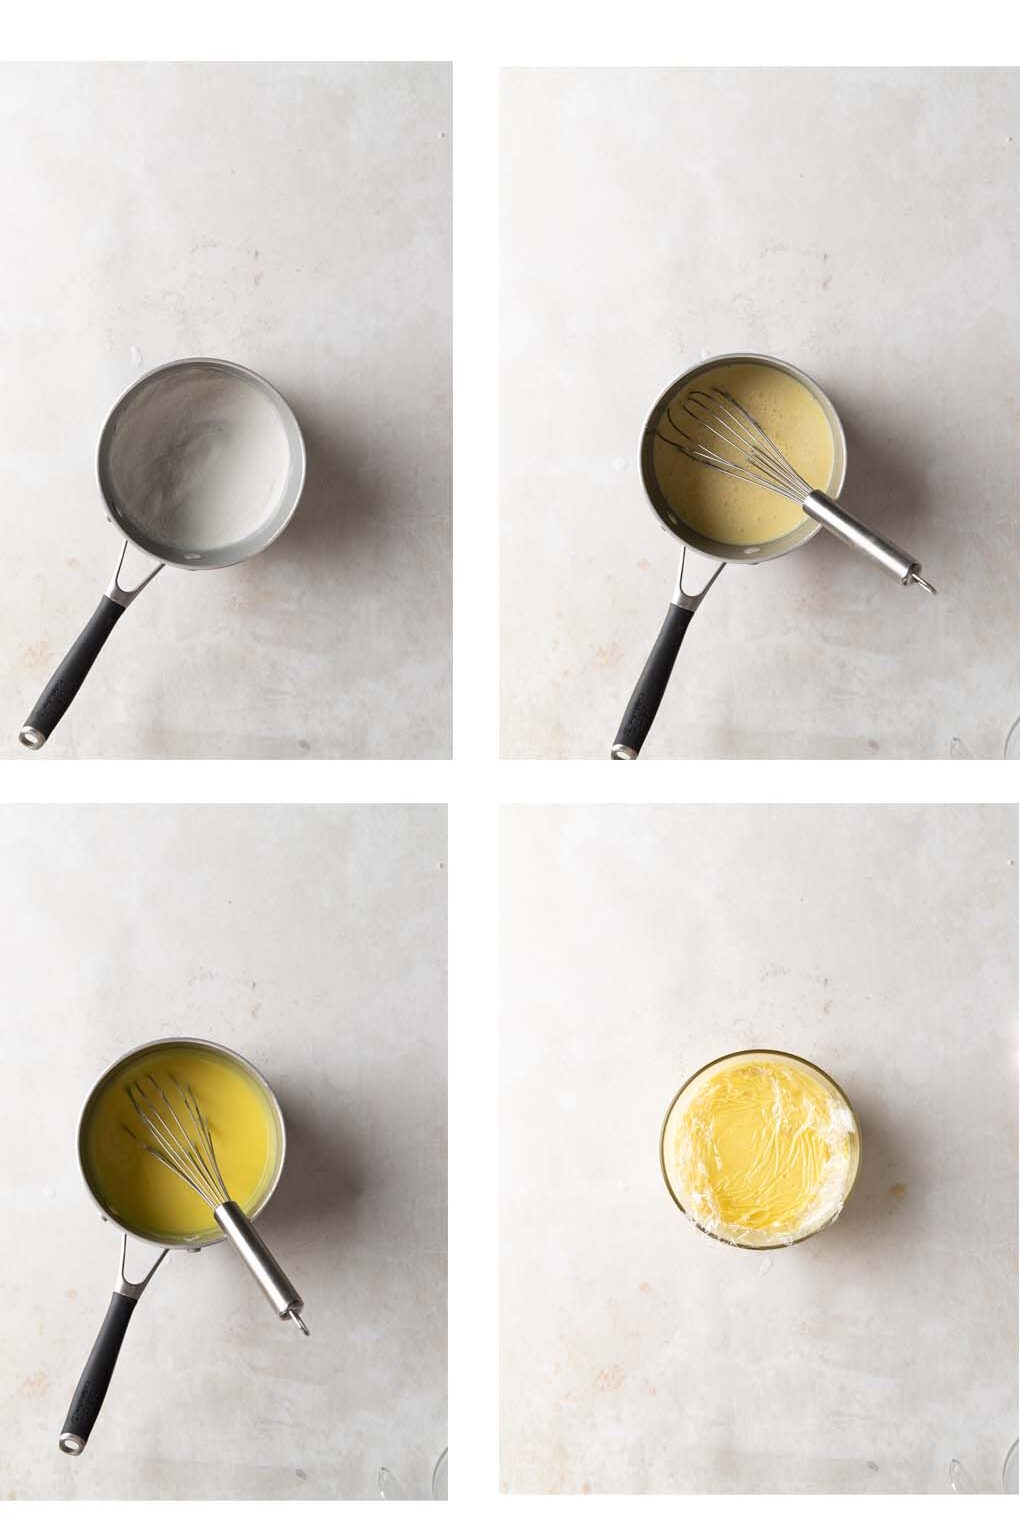 4 process images for making vanilla pudding